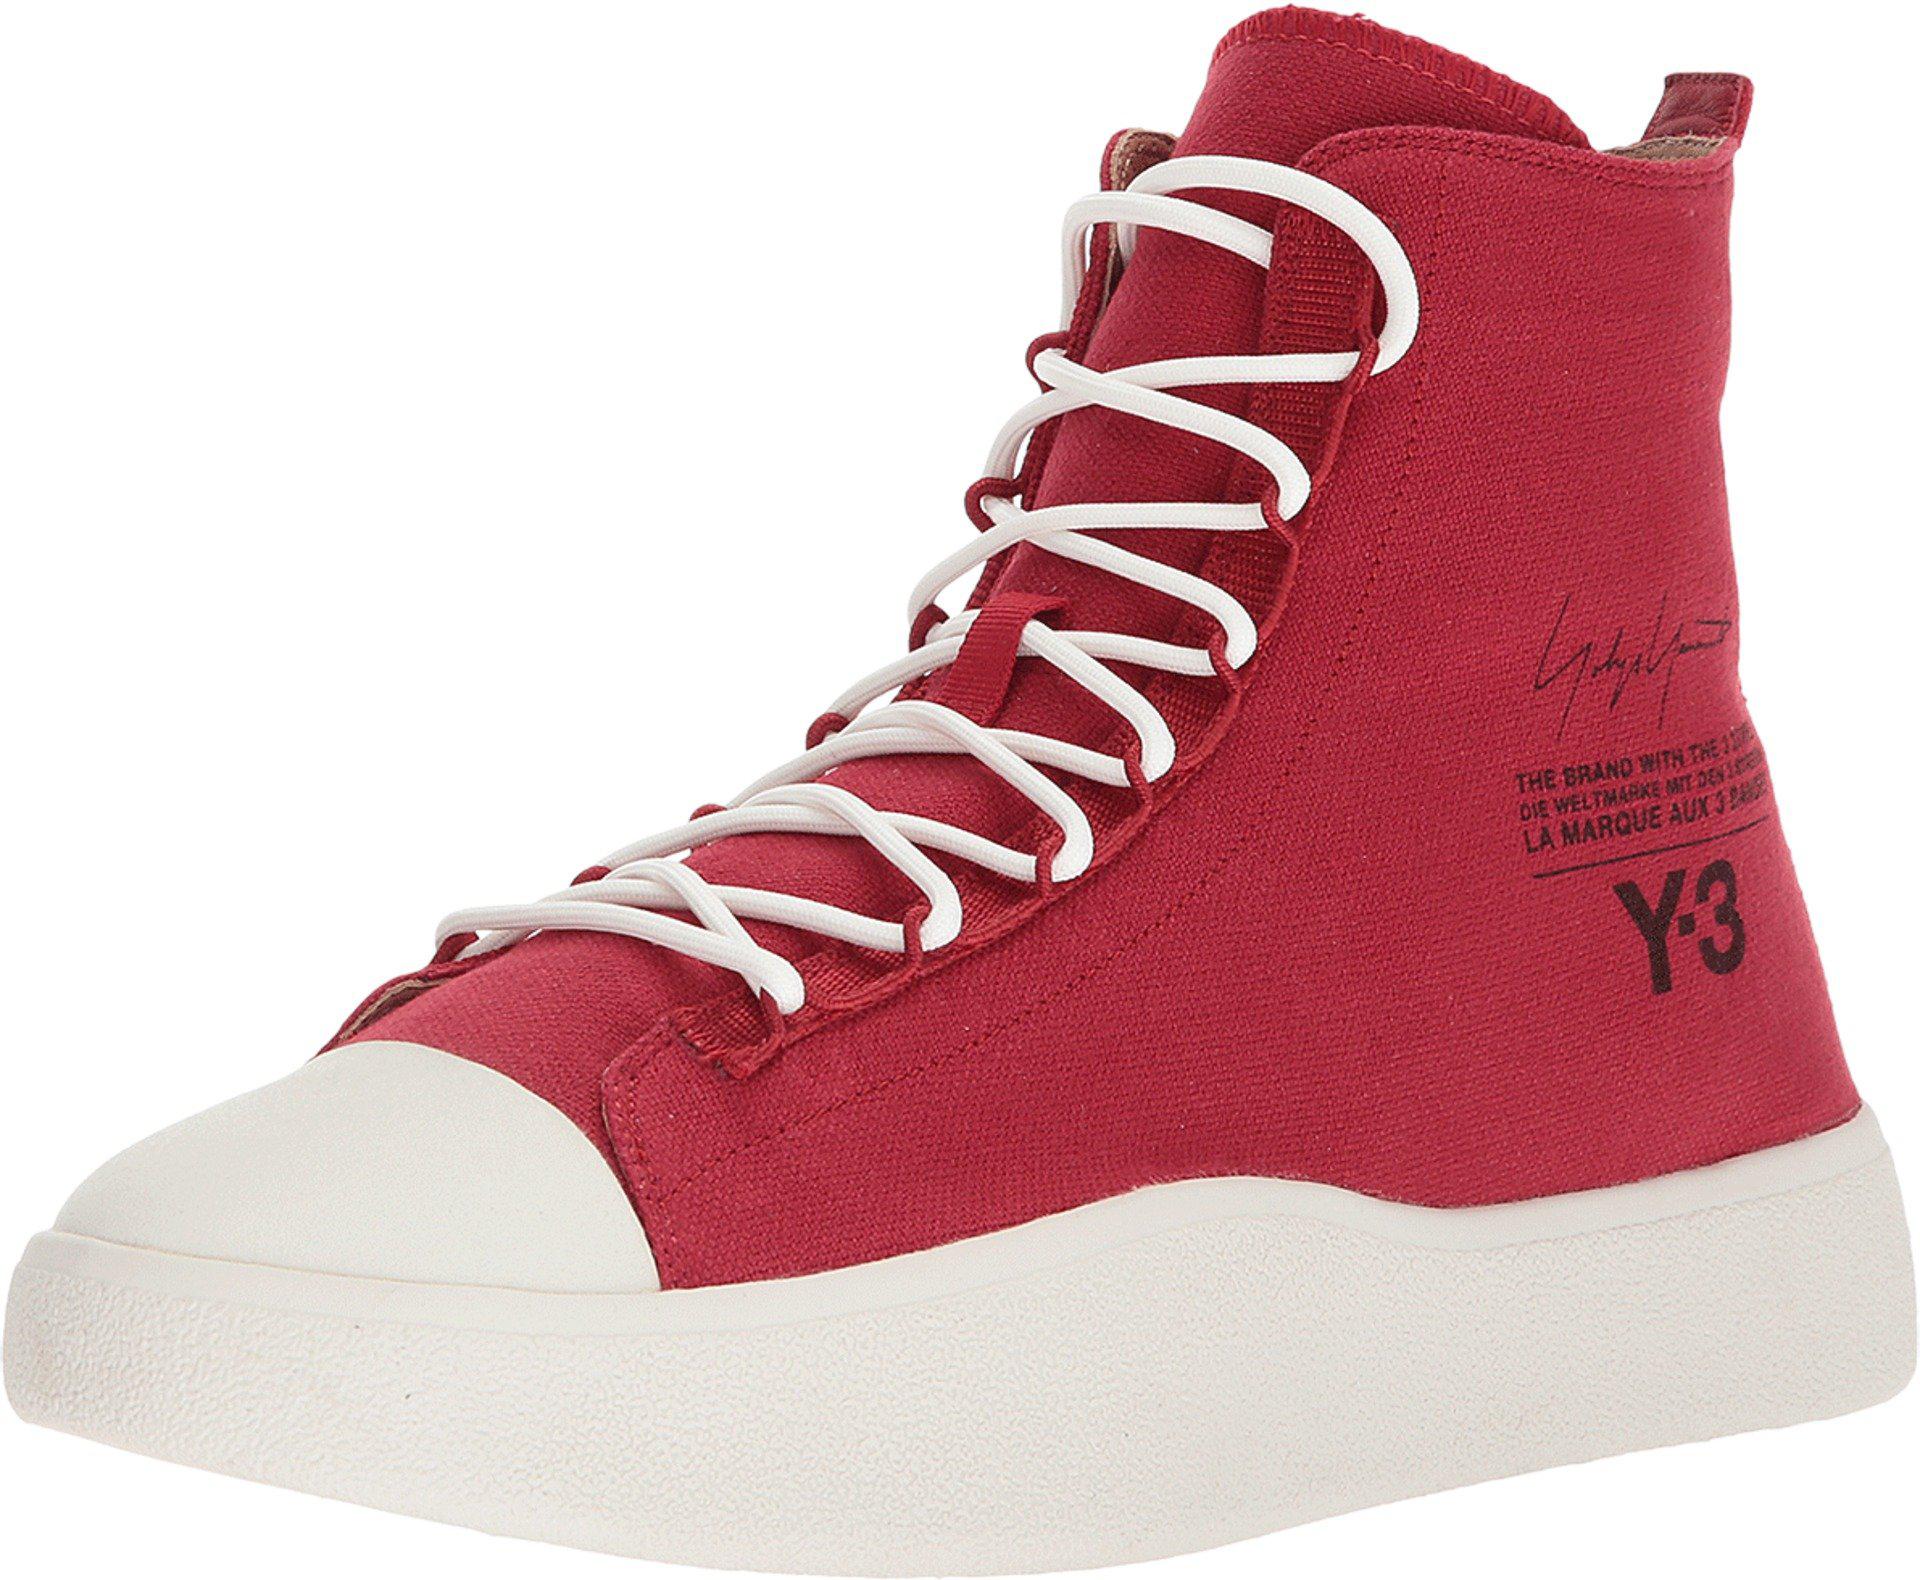 Y-3 Canvas Bashyo in Red for Men - Lyst